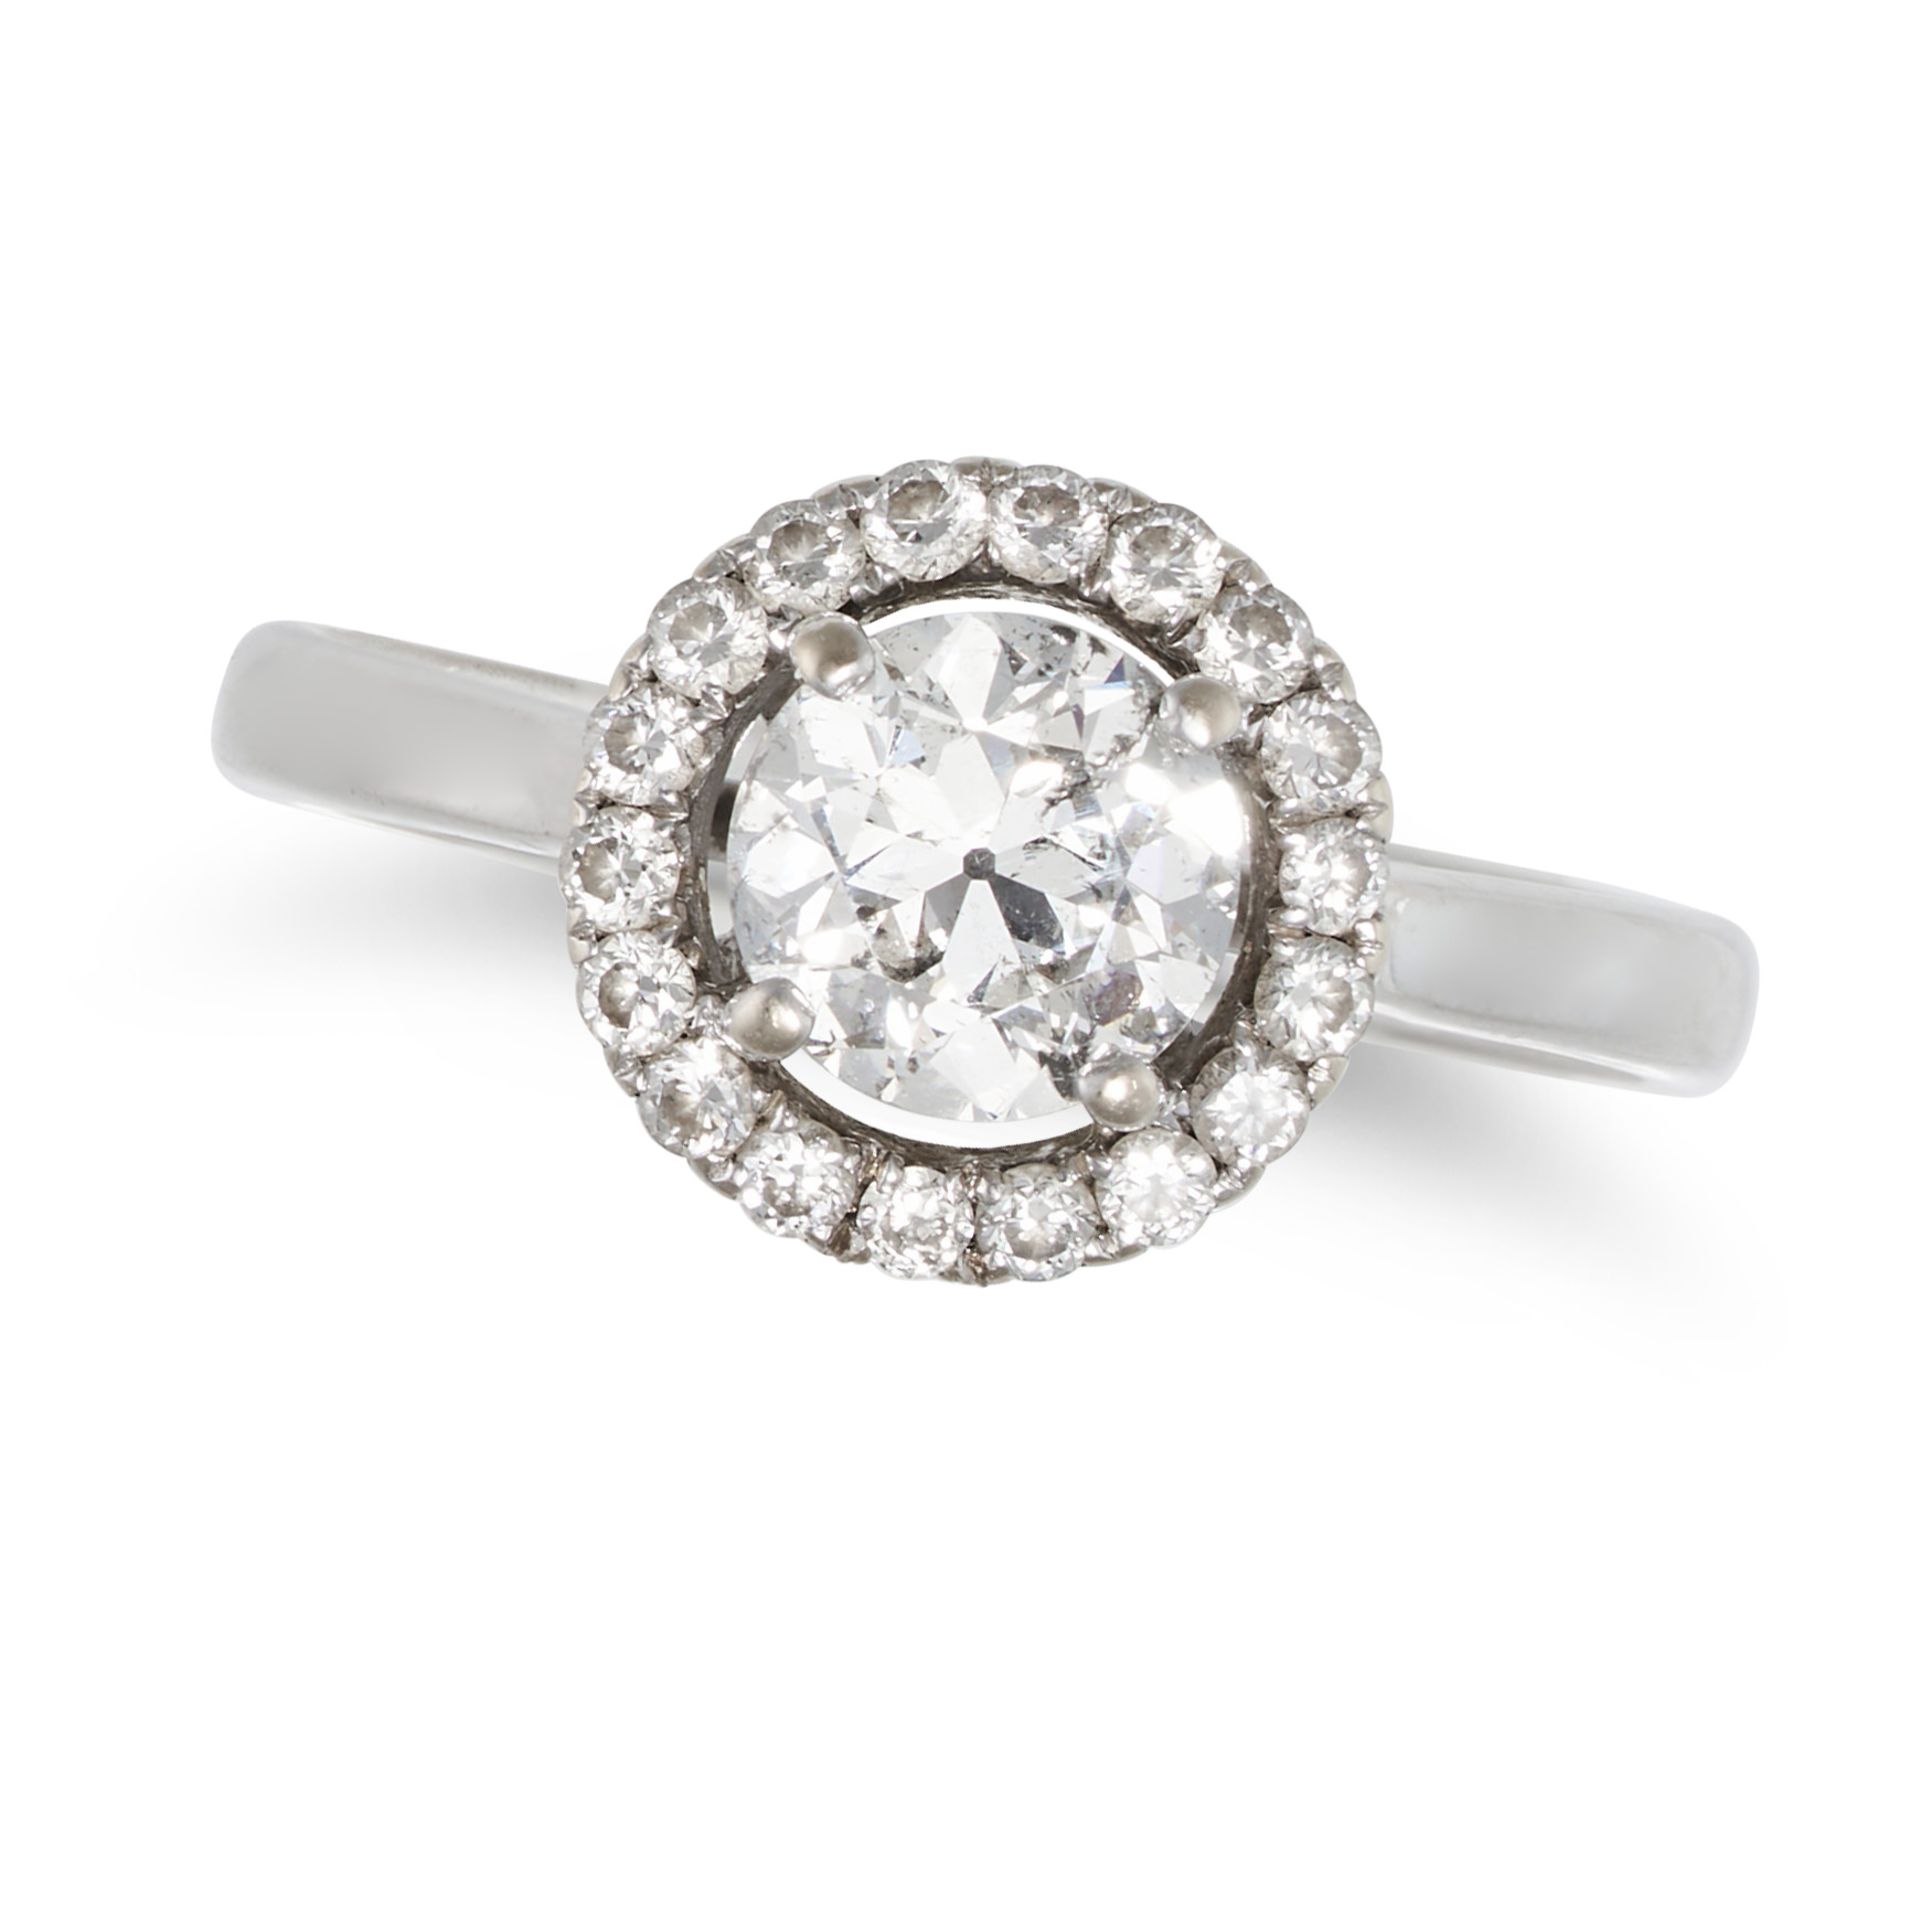 A DIAMOND RING in 18ct white gold, set with an old European cut diamond of approximately 0.77 car...